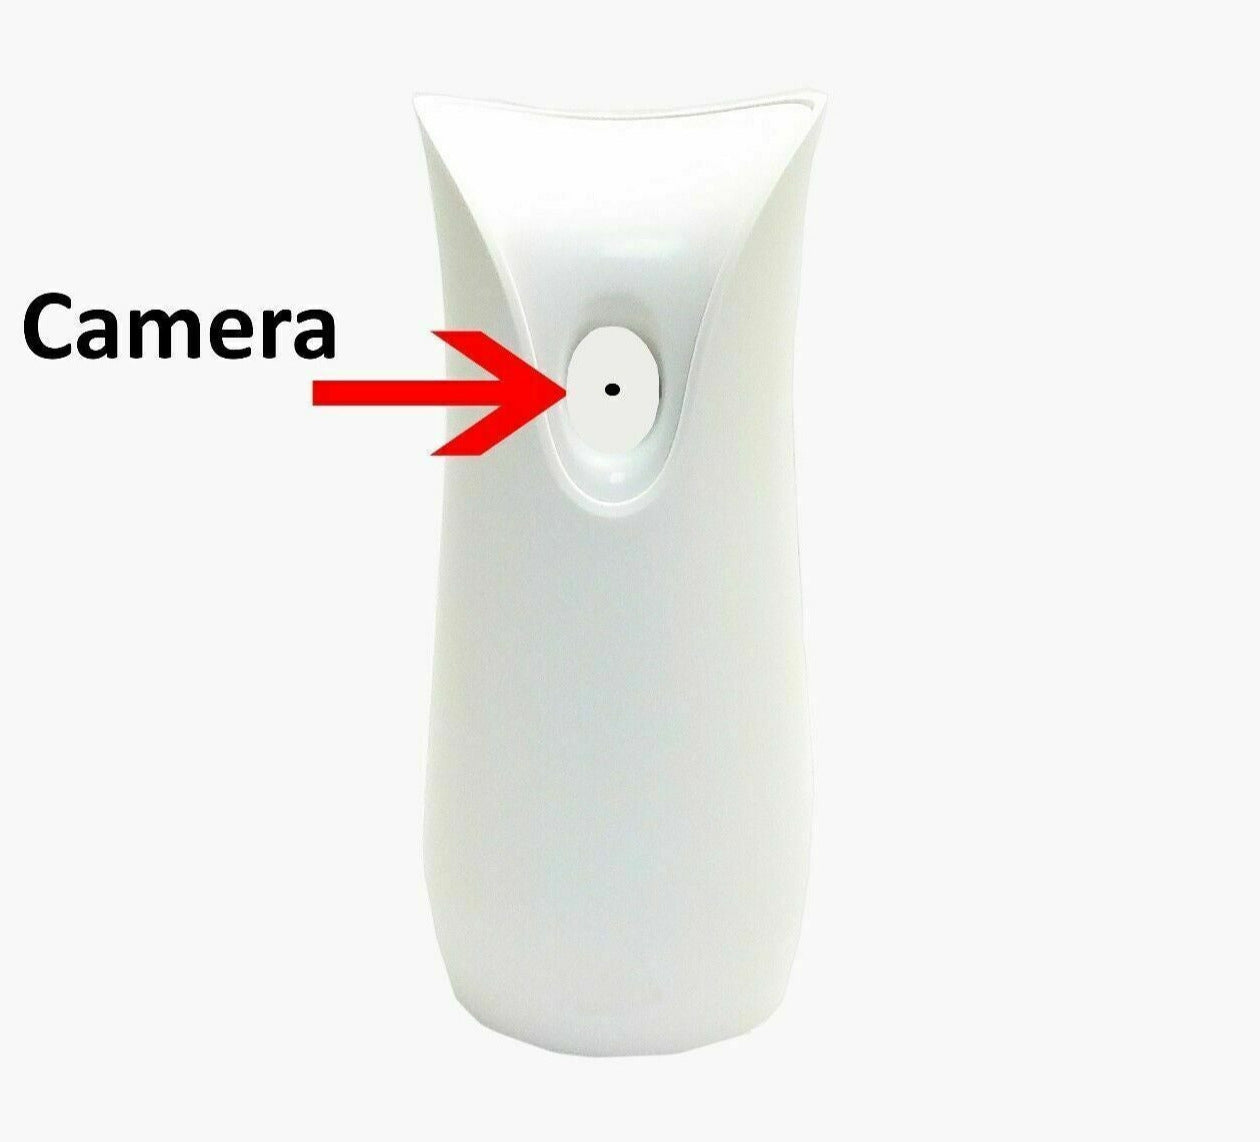 White automatic air freshener with built-in SpyCam indicated by an arrow.